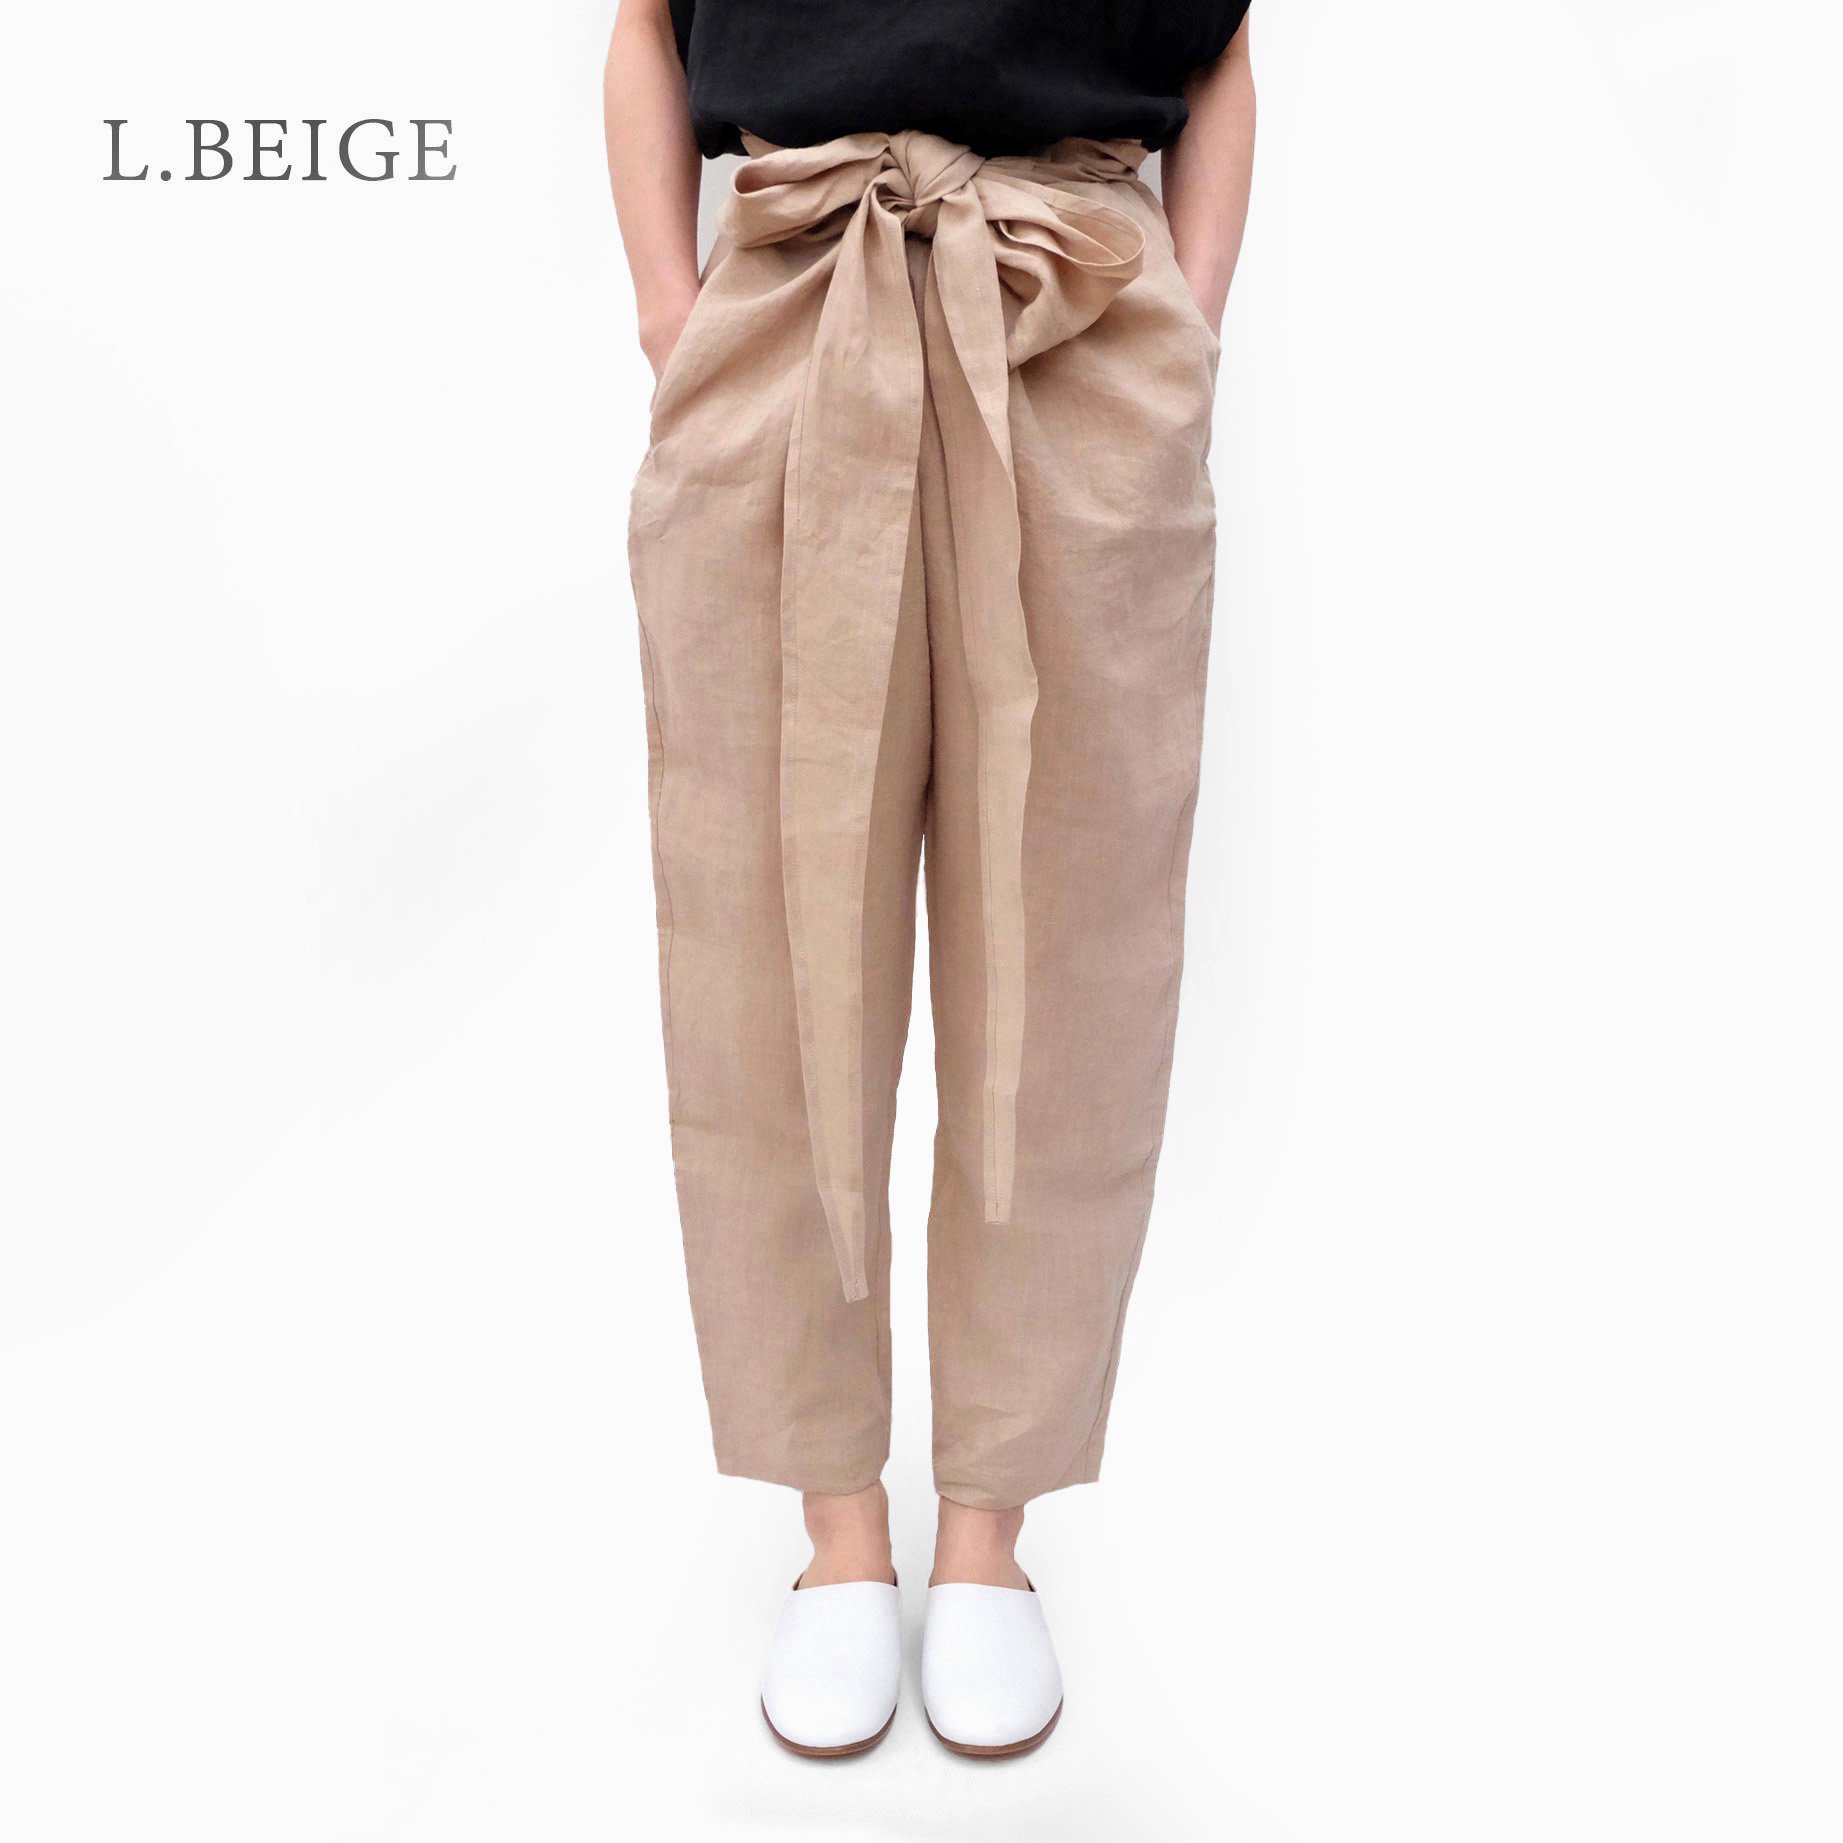 COSMIC WONDER / High count linen slim wrapped pants 【17CW11117】 - くるみの木